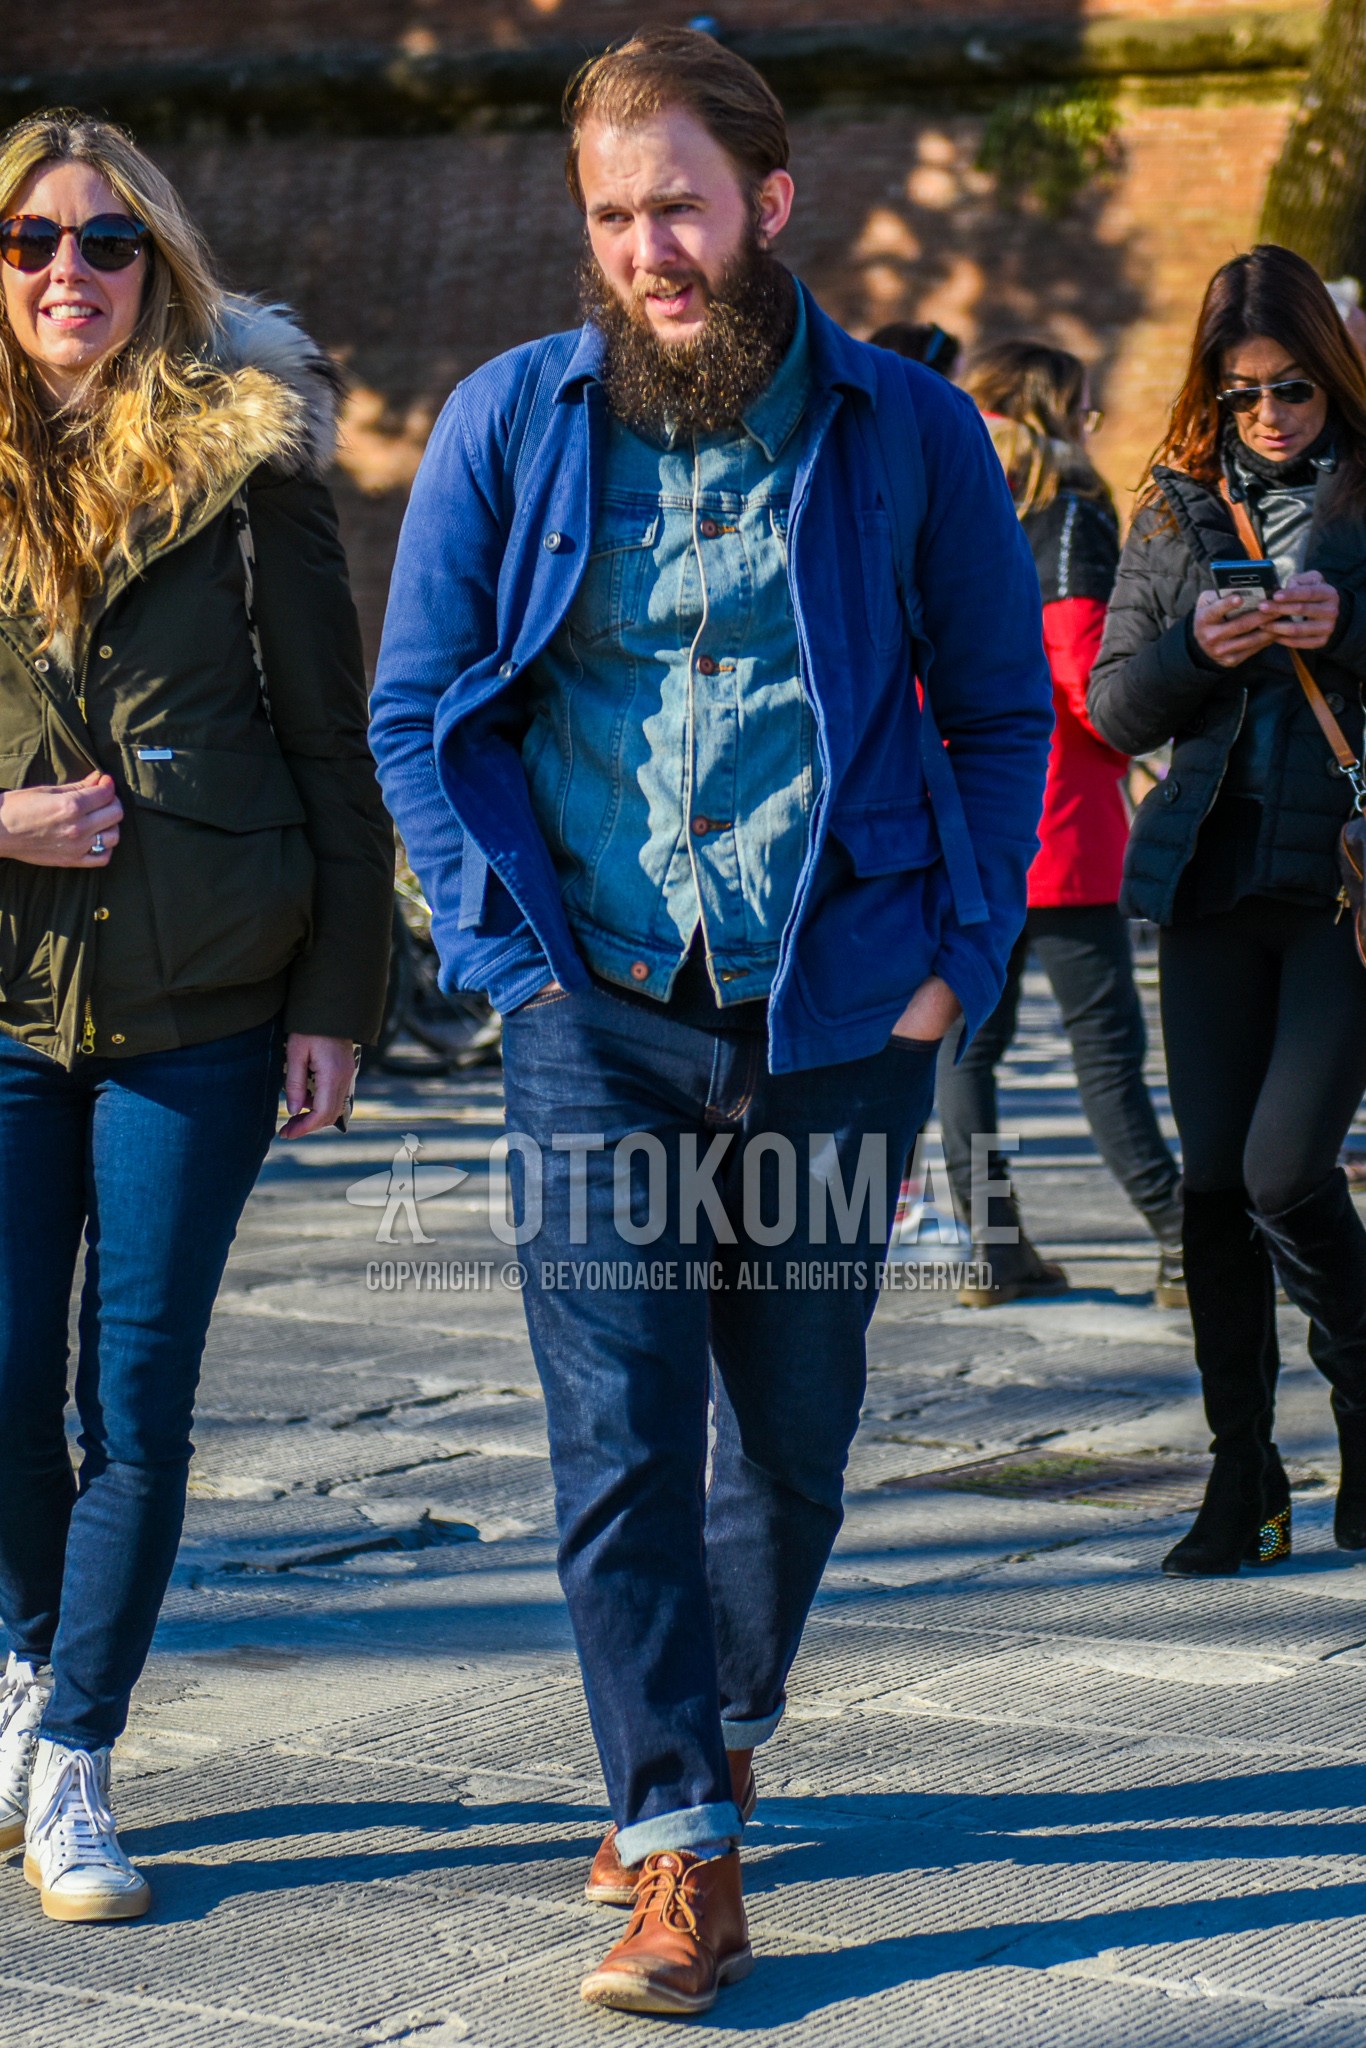 Men's autumn winter outfit with blue plain outerwear, blue plain denim jacket, blue plain denim/jeans, brown chukka boots.